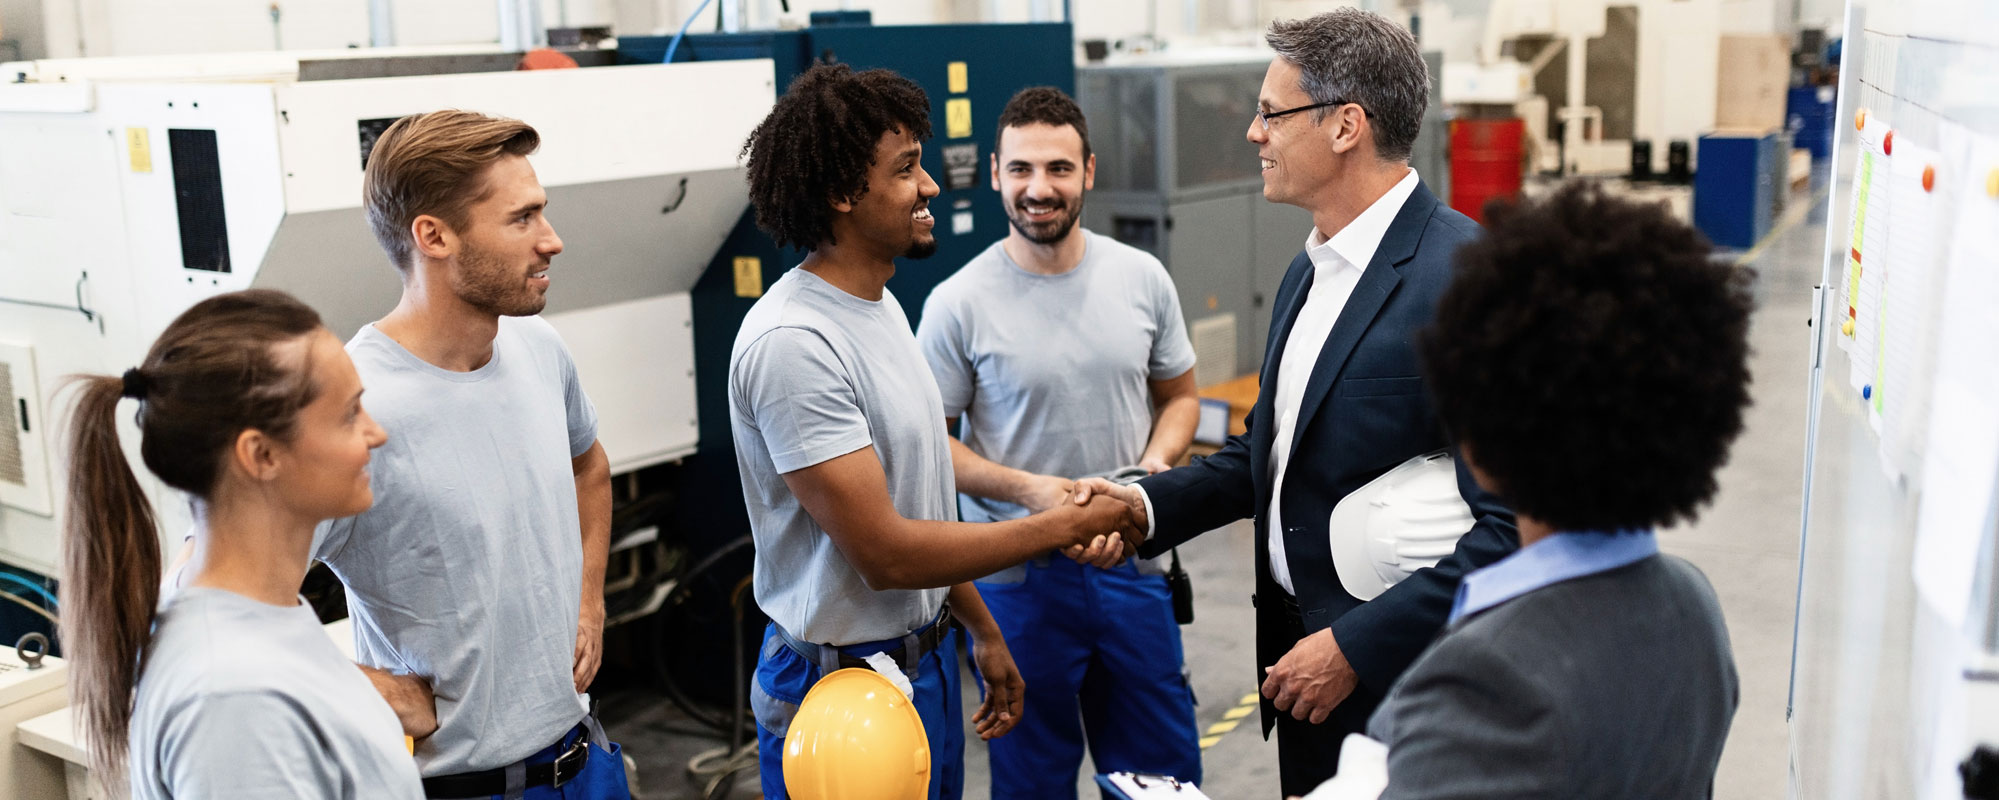 A supervisor shaking hands with one of his employees surrounded by a group of employees.